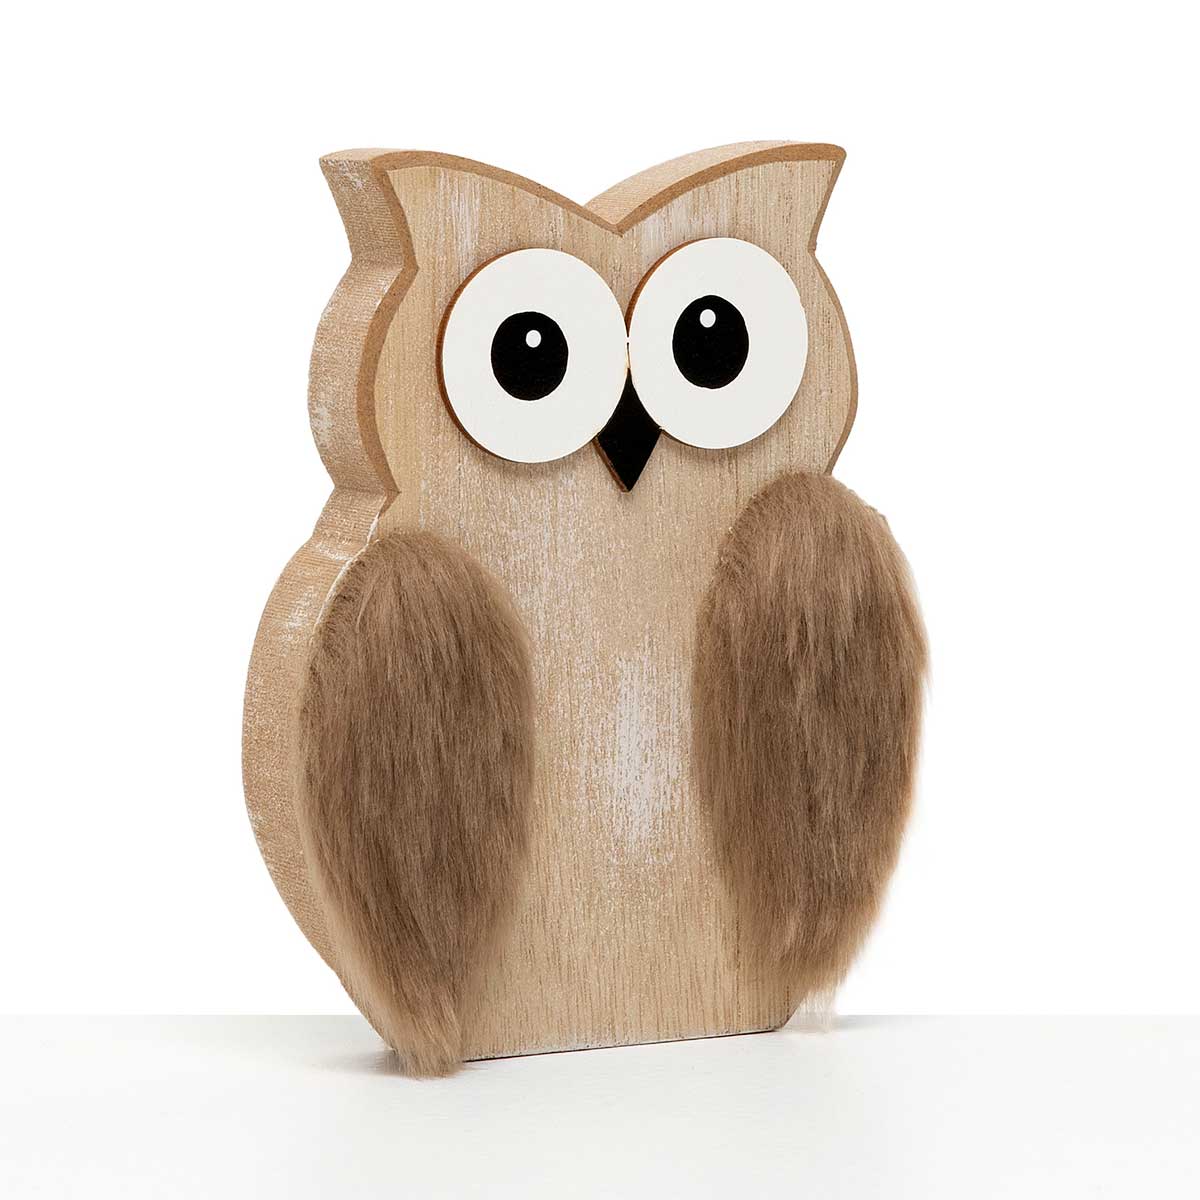 SIT-A-BOUT OWL 5IN X .75IN X 6.25IN